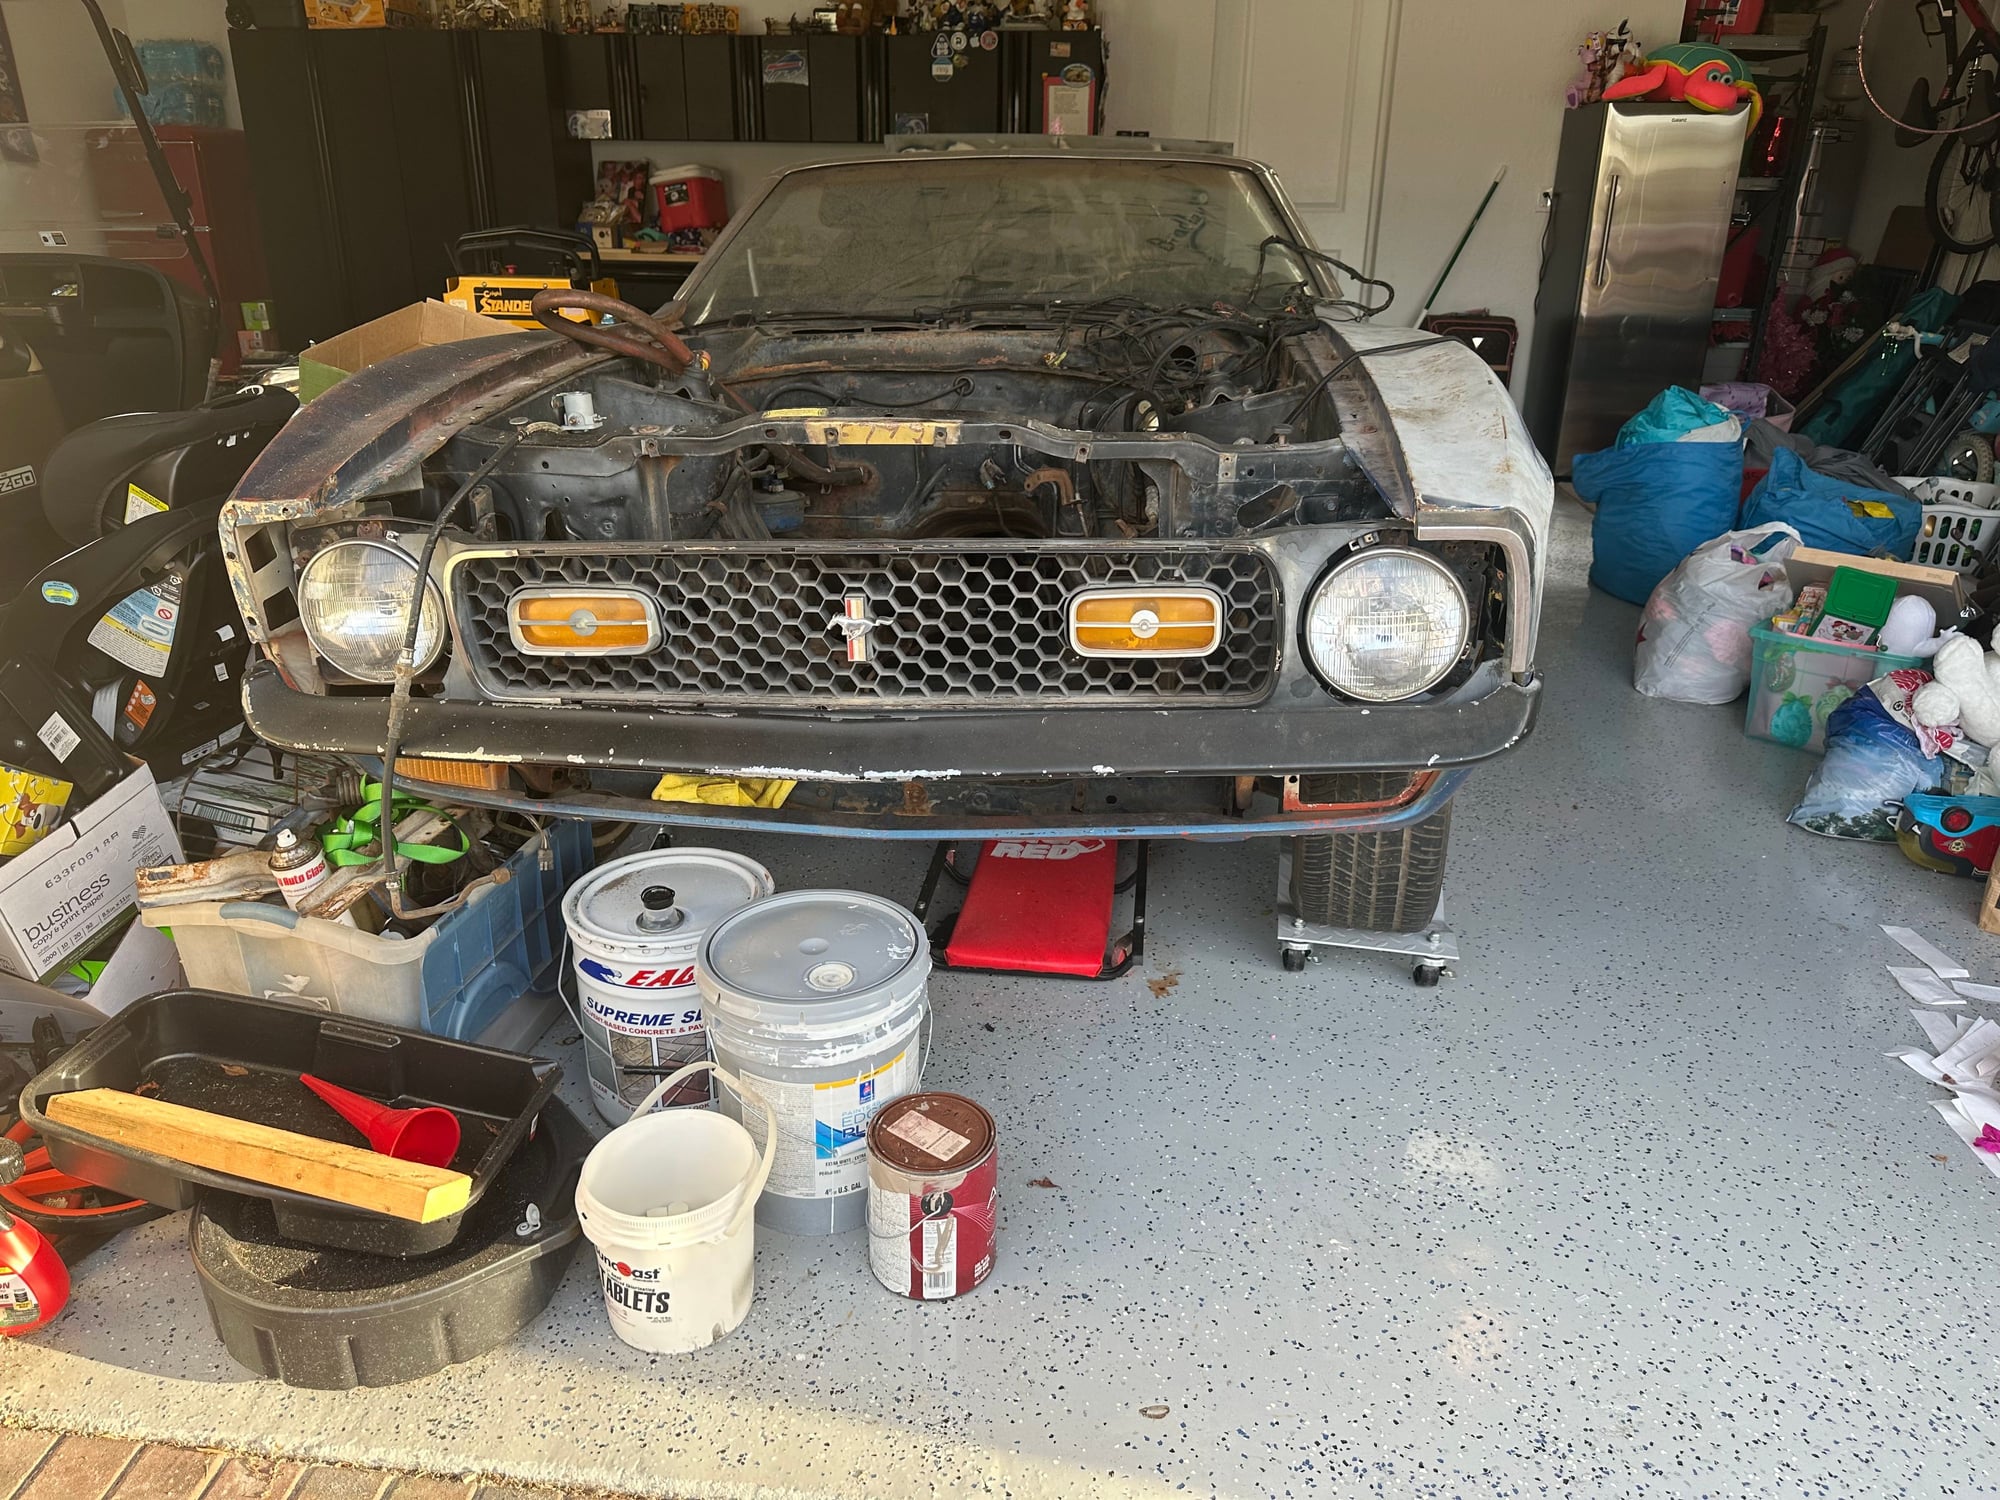 1972 Ford Mustang - 1972 mustang: complete rebuild needed - Used - VIN 2F03H214950 - Royal Palm Beach, FL 33411, United States